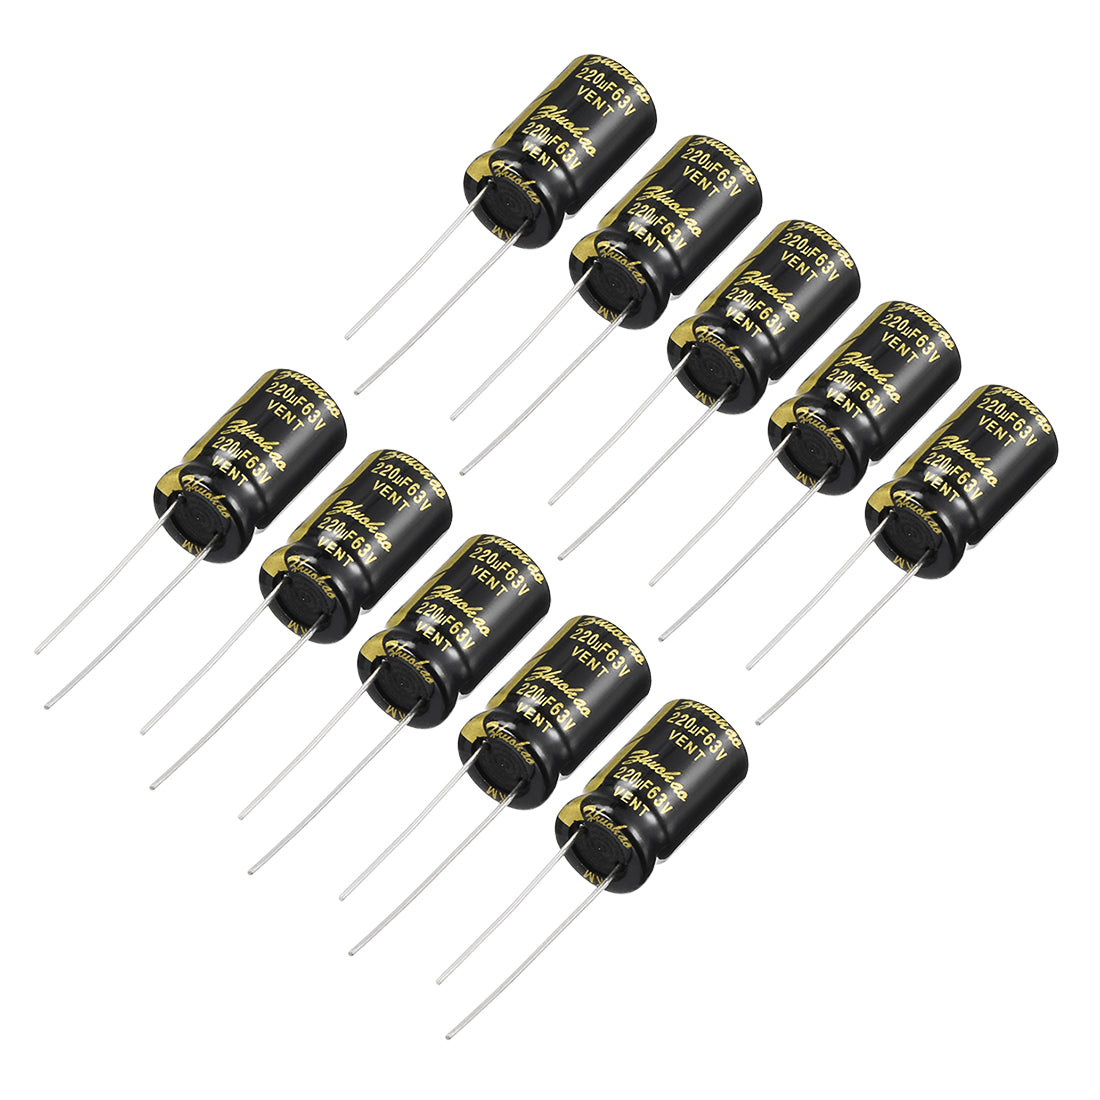 uxcell Uxcell Aluminum Radial Electrolytic Capacitor with 220uF 63V 105 Celsius Life 2000H 10 x 17 mm Black 10pcs